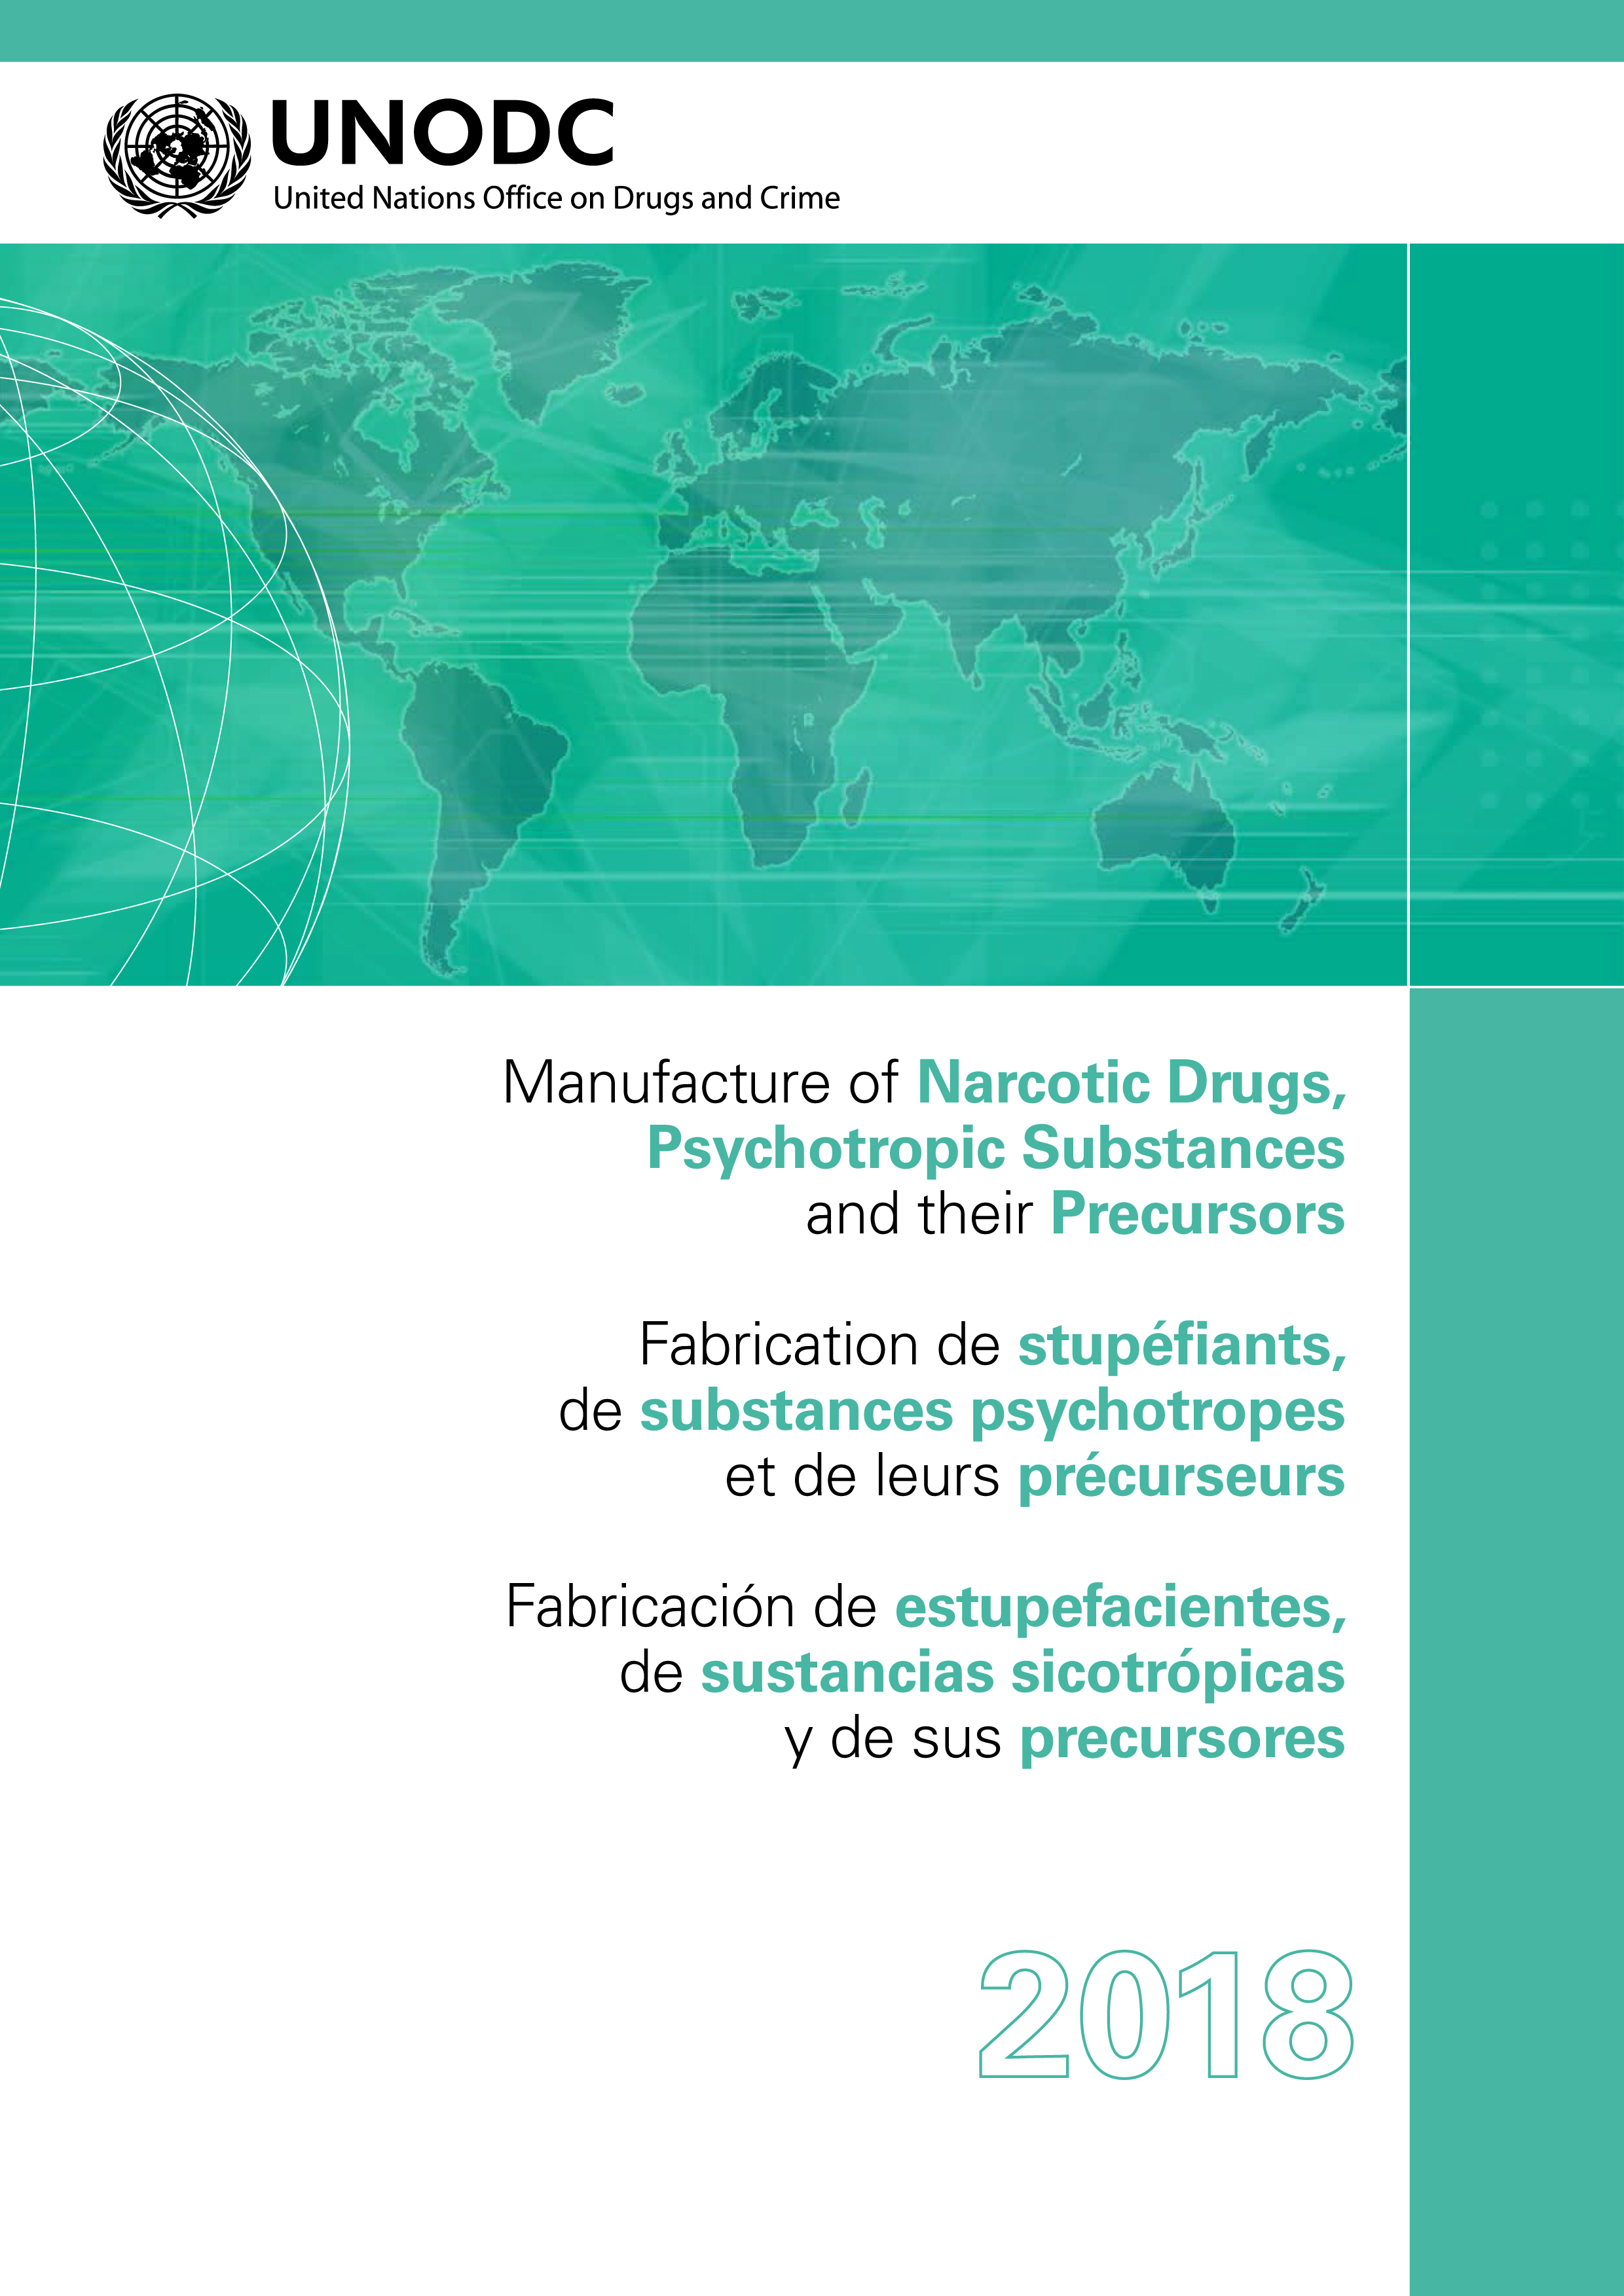 image of Manufacture of Narcotic Drugs, Psychotropic Substances and their Precursors 2018